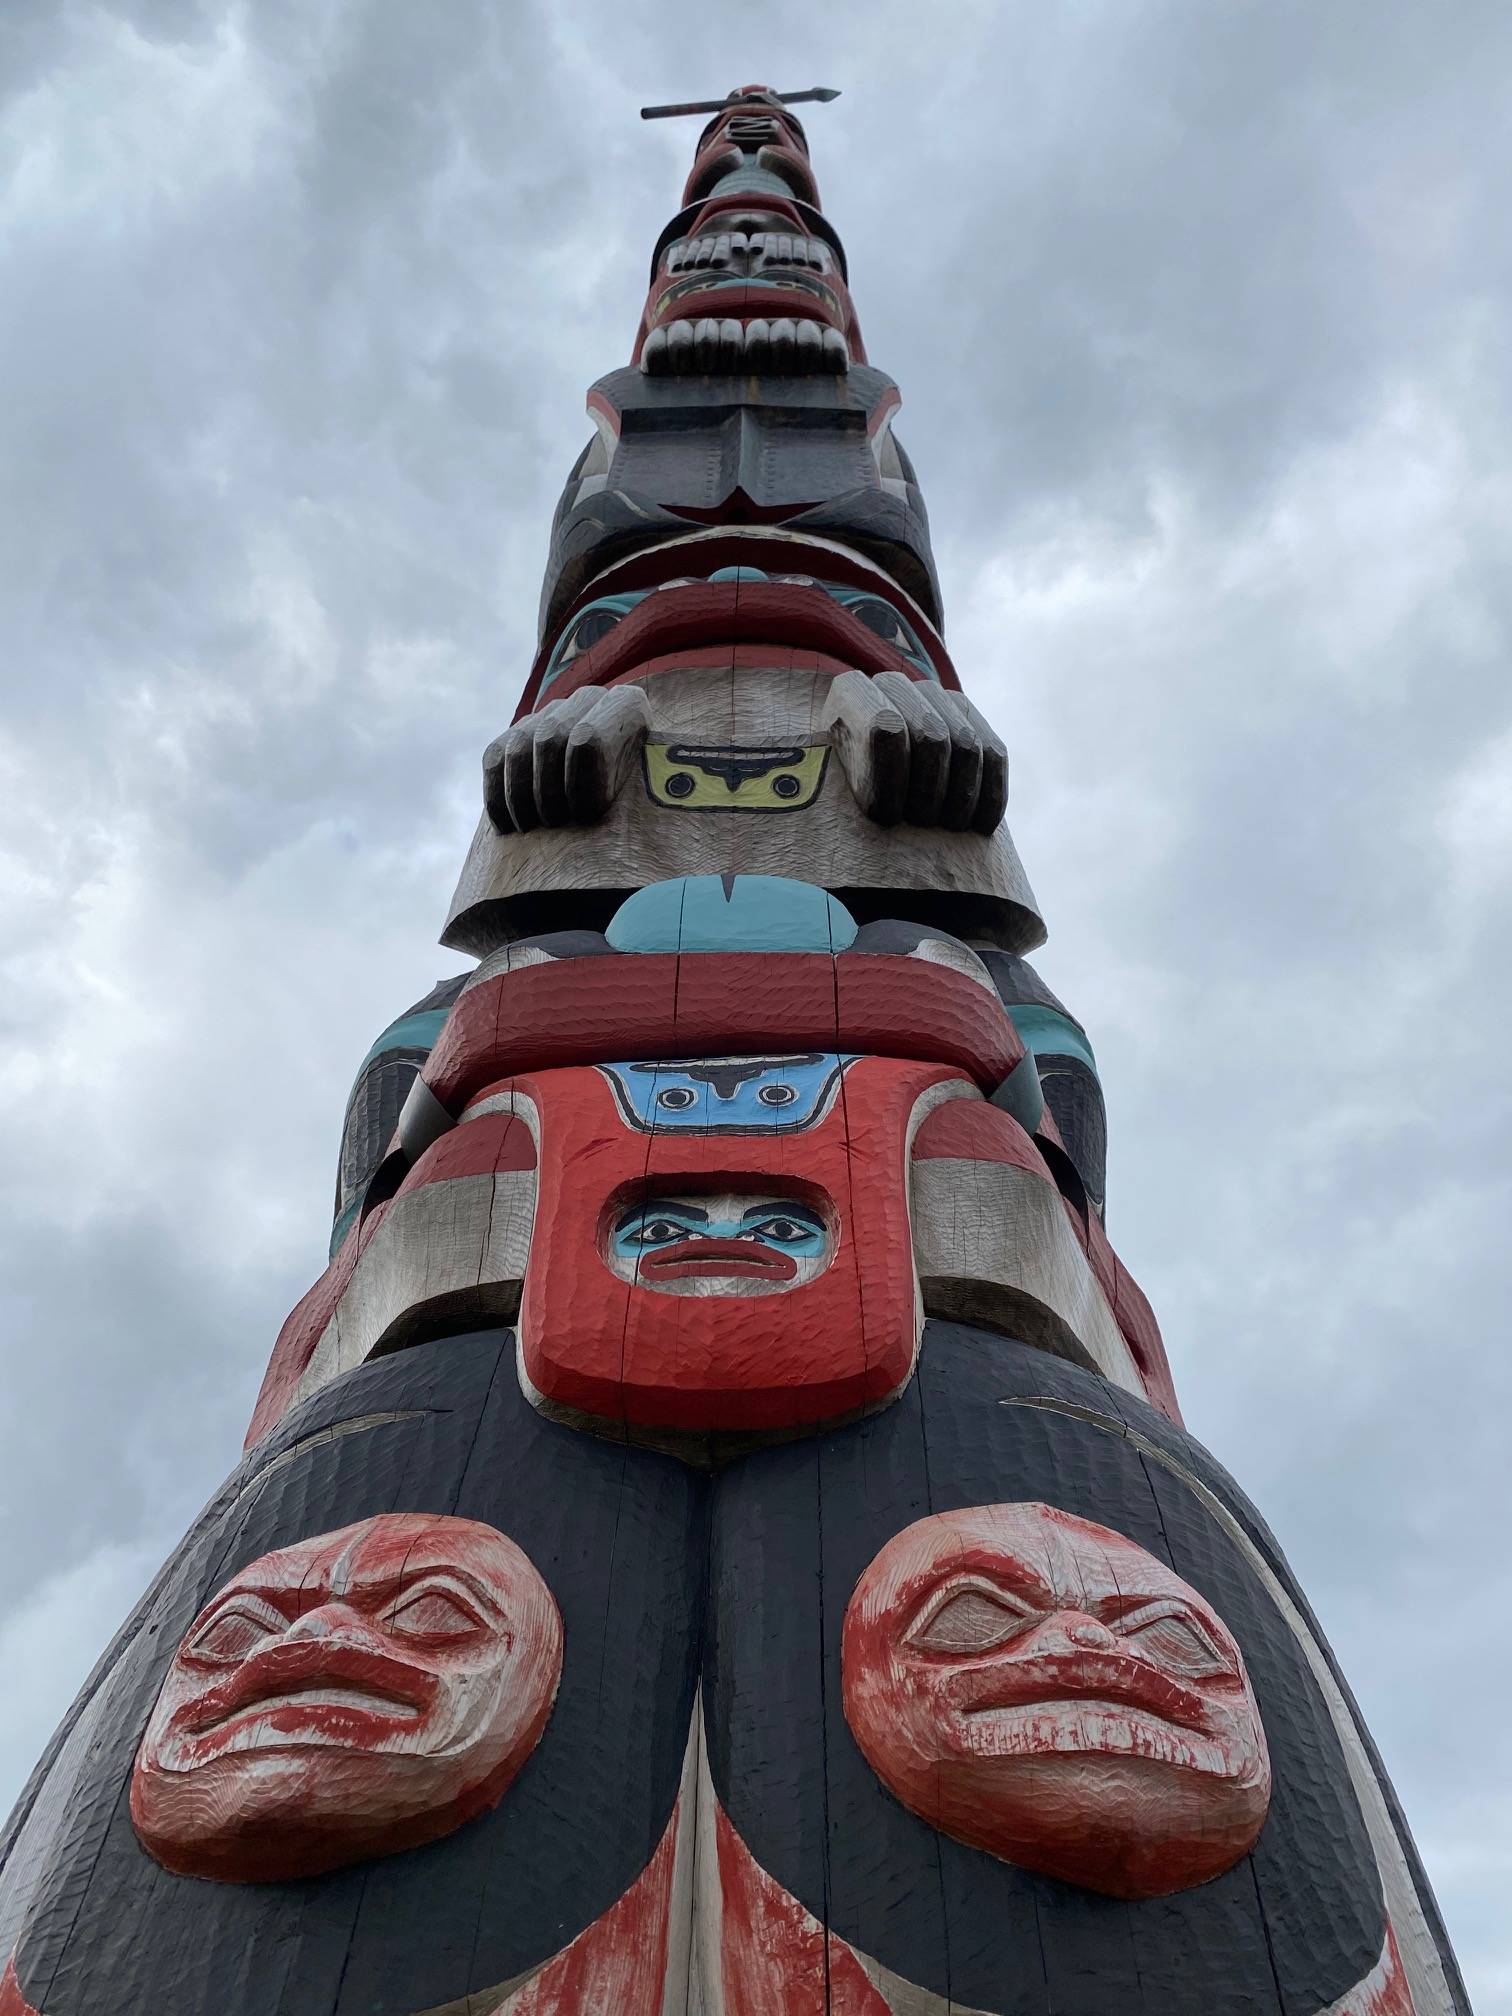 A totem so high that it reaches the sky towers at Sandy Beach on Aug. 29, 2020. (Courtesy Photo / Denise Carroll)